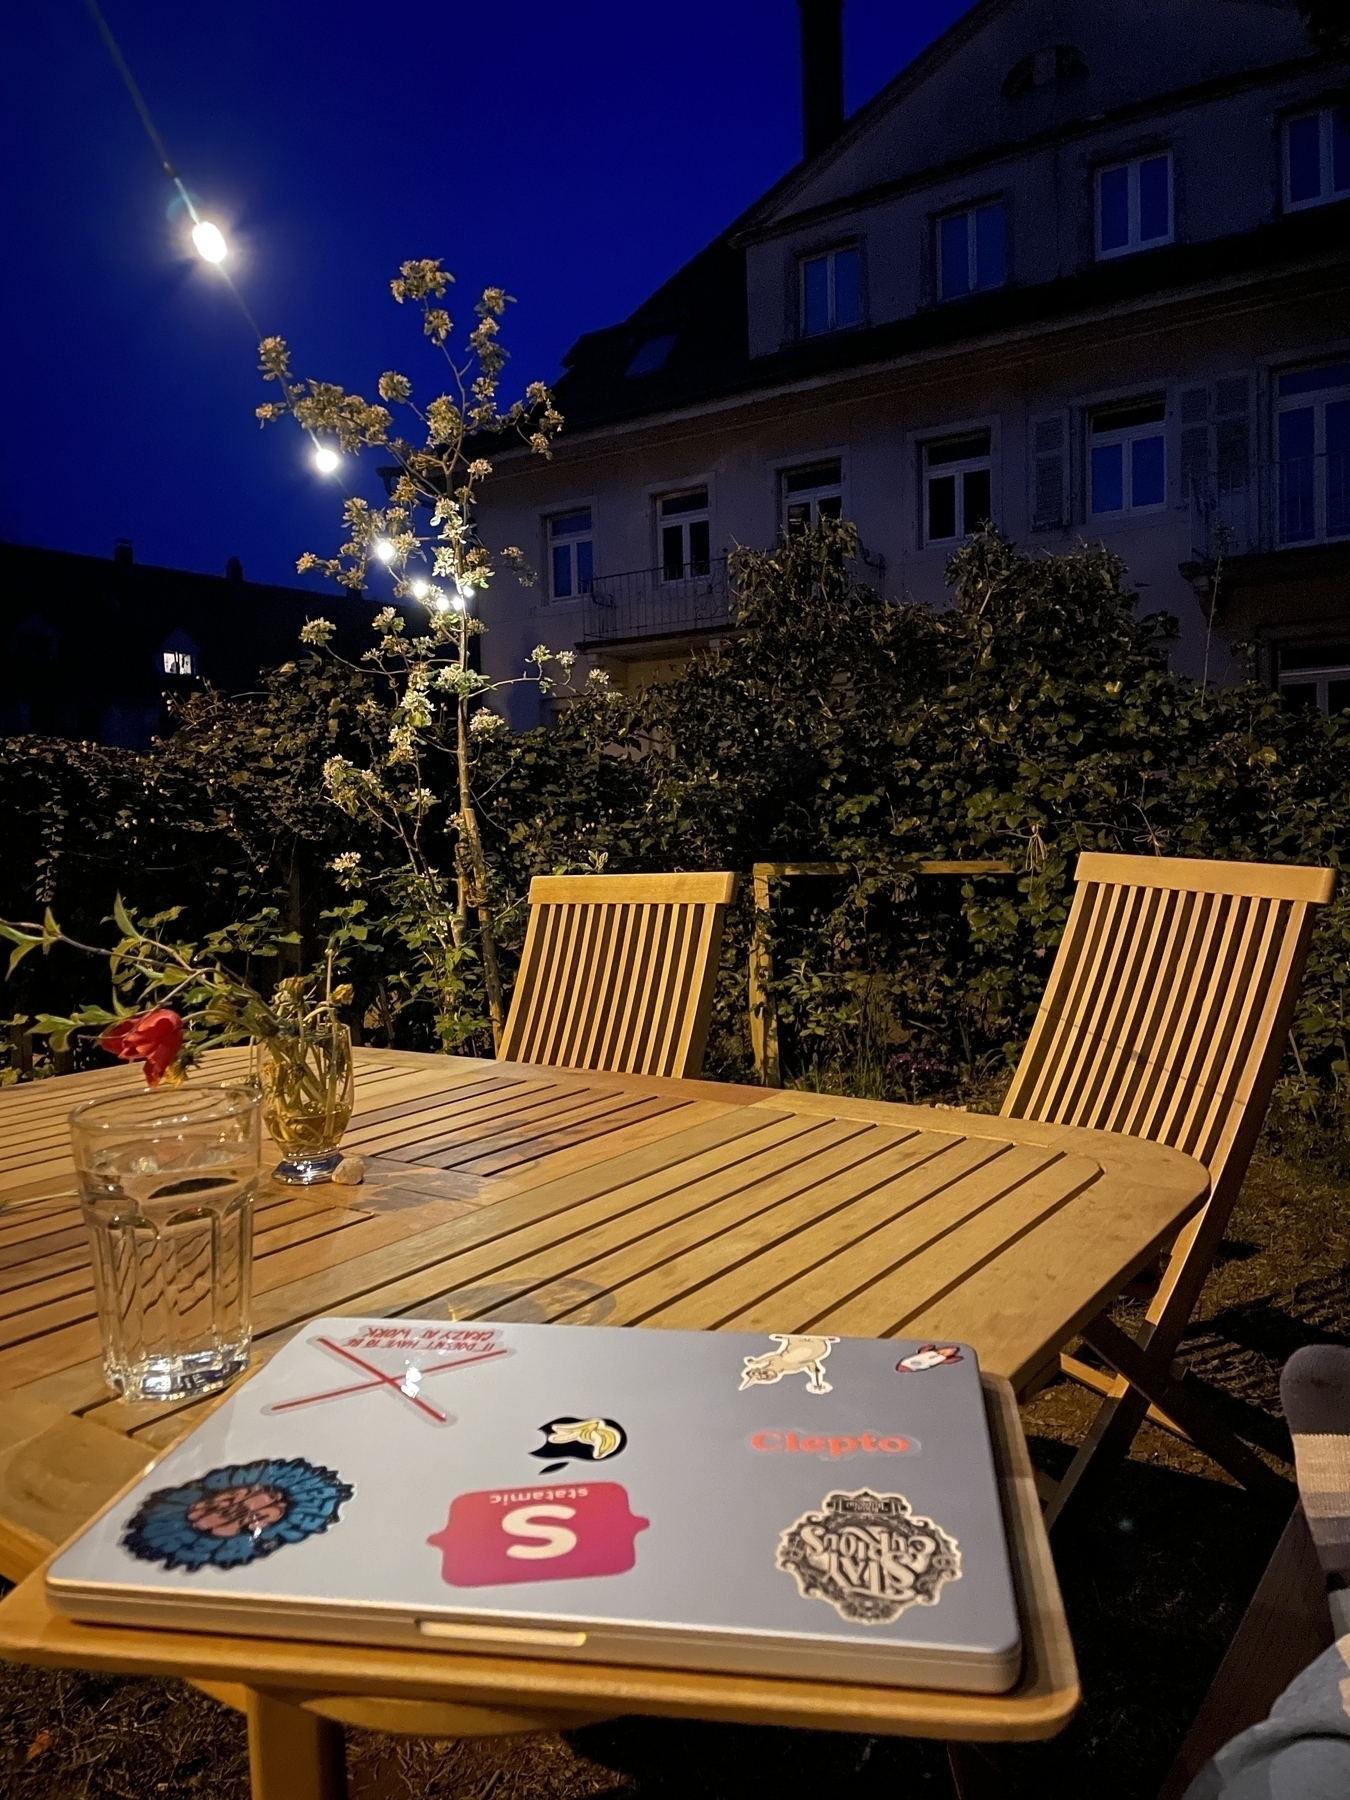 Garden furniture at Night, closed laptop laying on the table